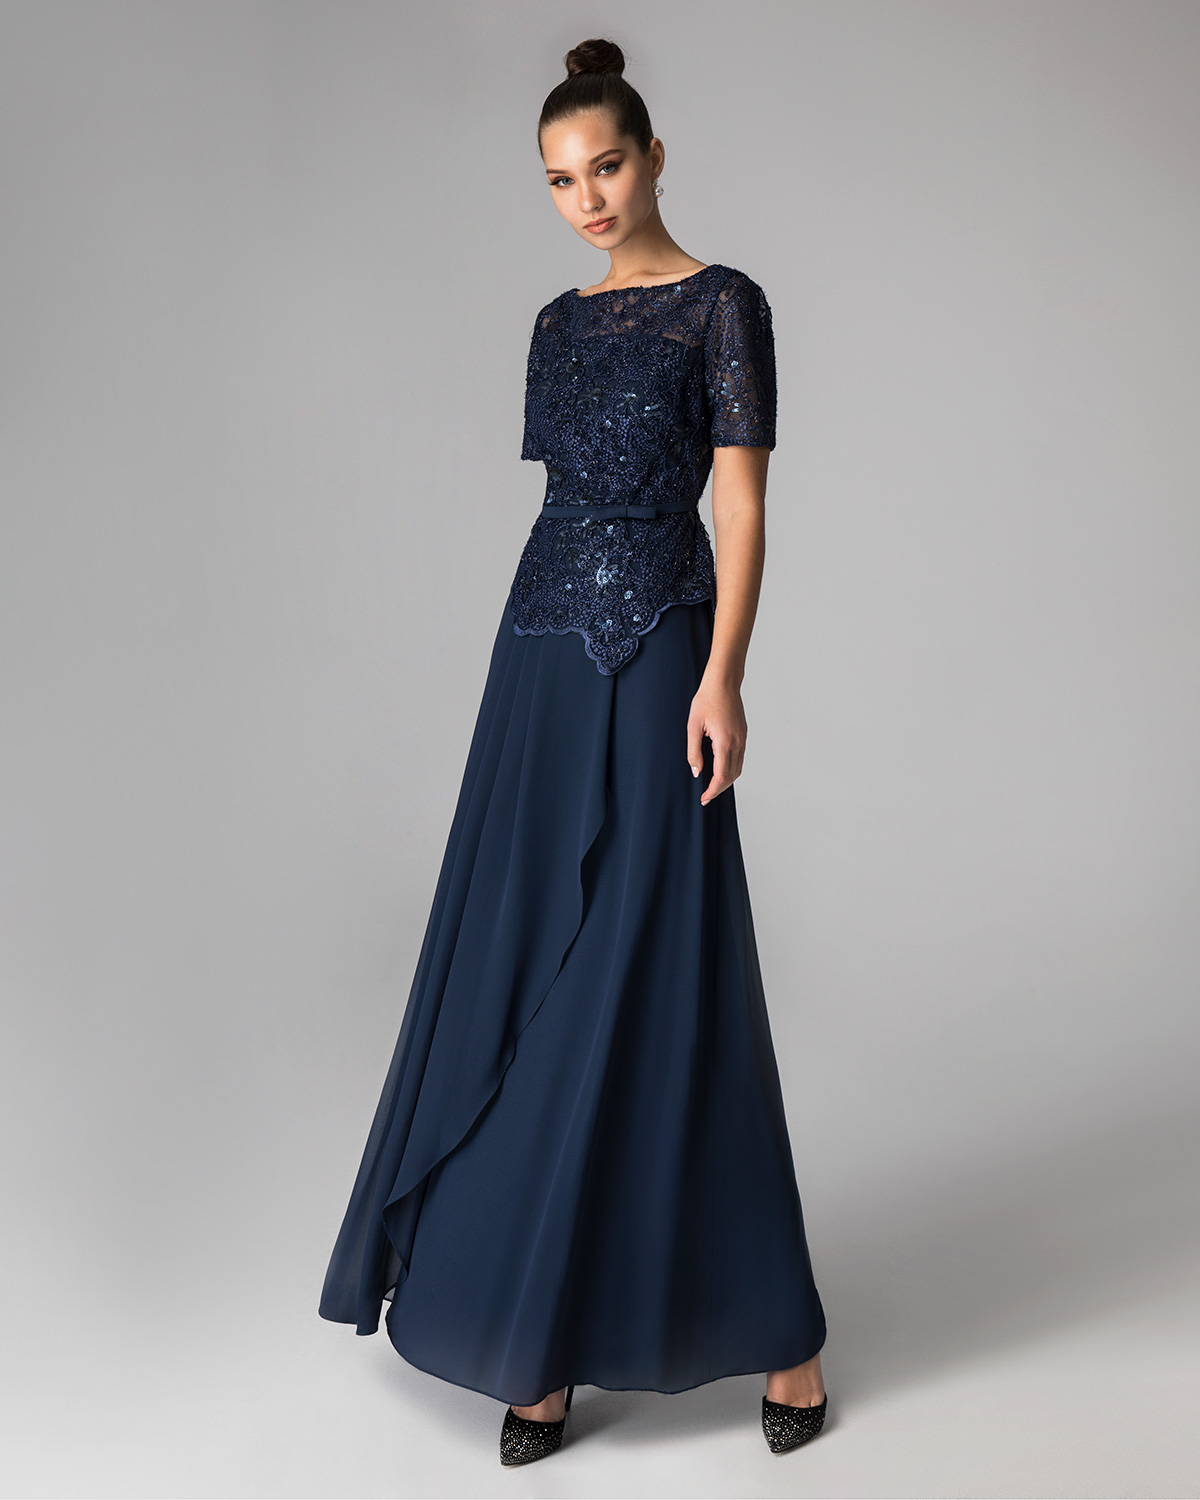 Classic Dresses / Long evening dress for mother of the bride  with lace top and short sleeves